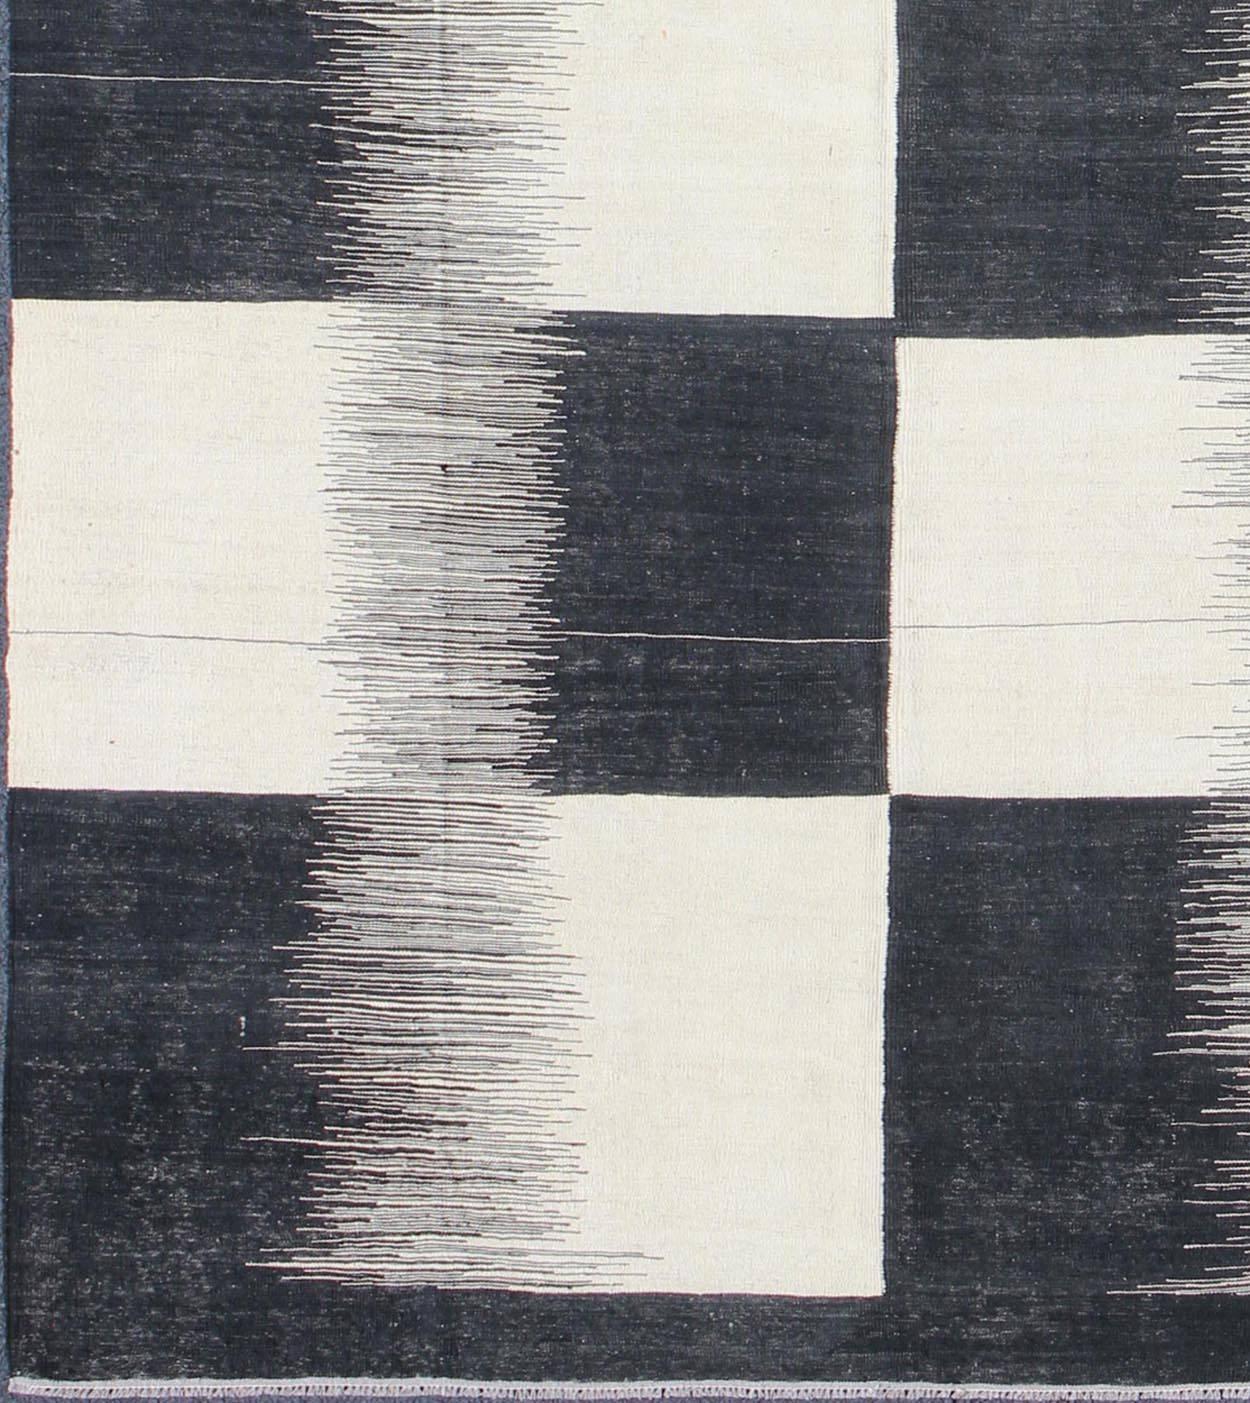 Afghan Modern Kilim Rug with Black, White, and Gray Large Block and Checkerboard Design, rug mse-3, country of origin / type: Afghanistan / Kilim.

This designer Kilim is decorated with a large scale checkerboard pattern. 
Measures: 8'2 x 12'.